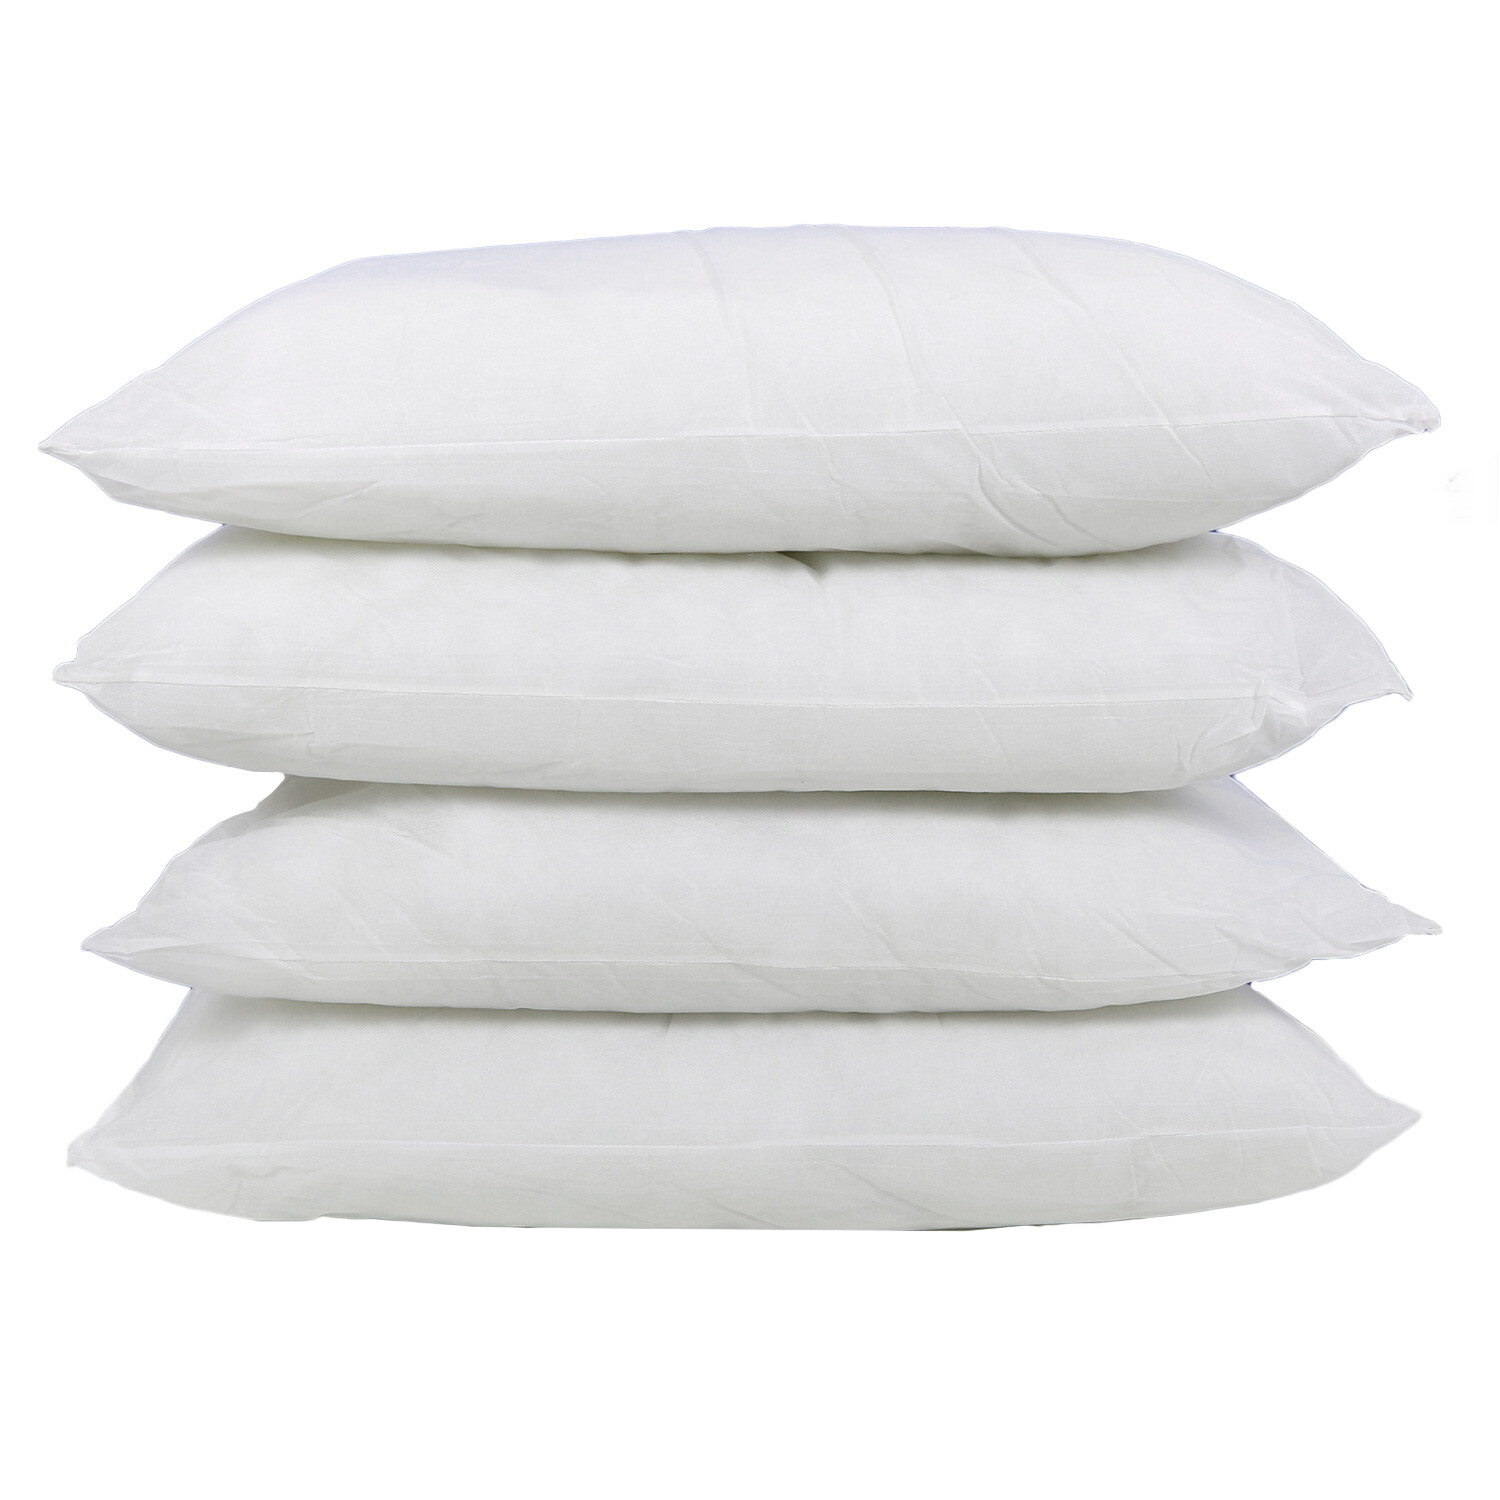 Comfortableoptions Luxury Bounce Pillows 4 Pack Image 1